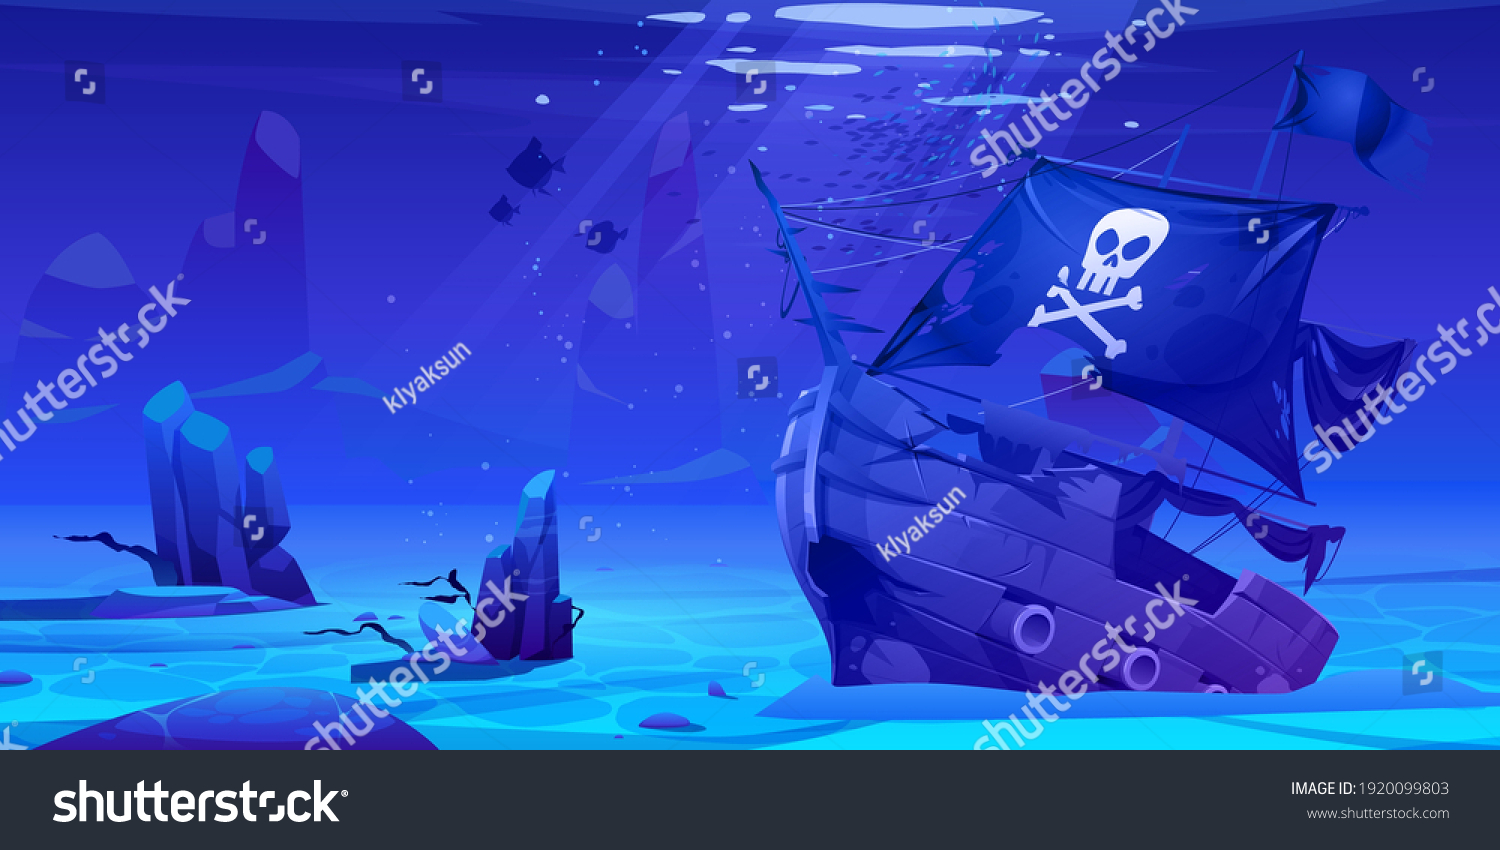 SVG of Wreck pirate ship, sunken filibuster vessel, wooden boat with jolly roger flag on ocean sandy bottom with sun beams falling from above, underwater world pc game background. Cartoon vector illustration svg